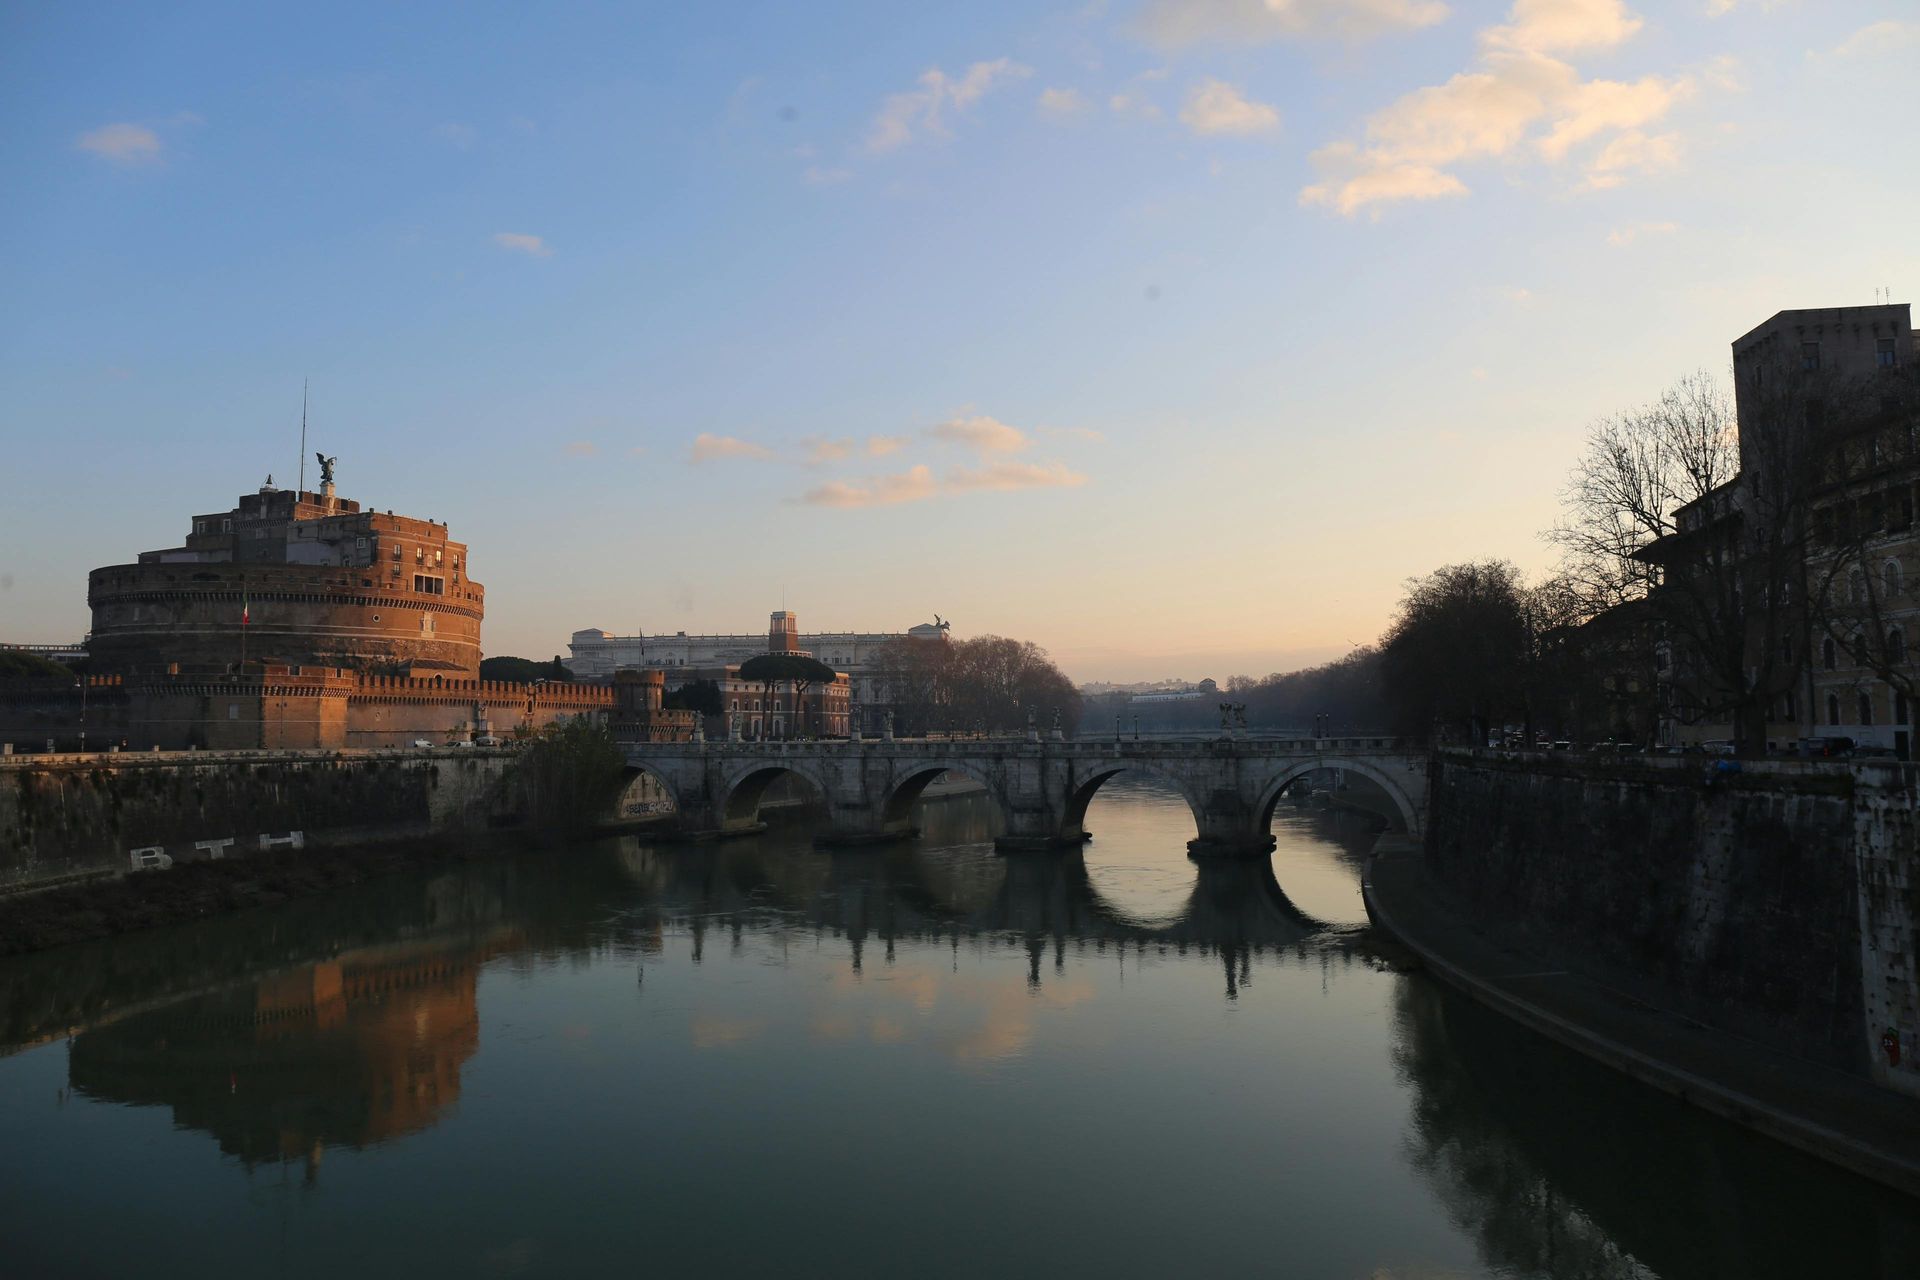 How to reach Castel Sant Angelo